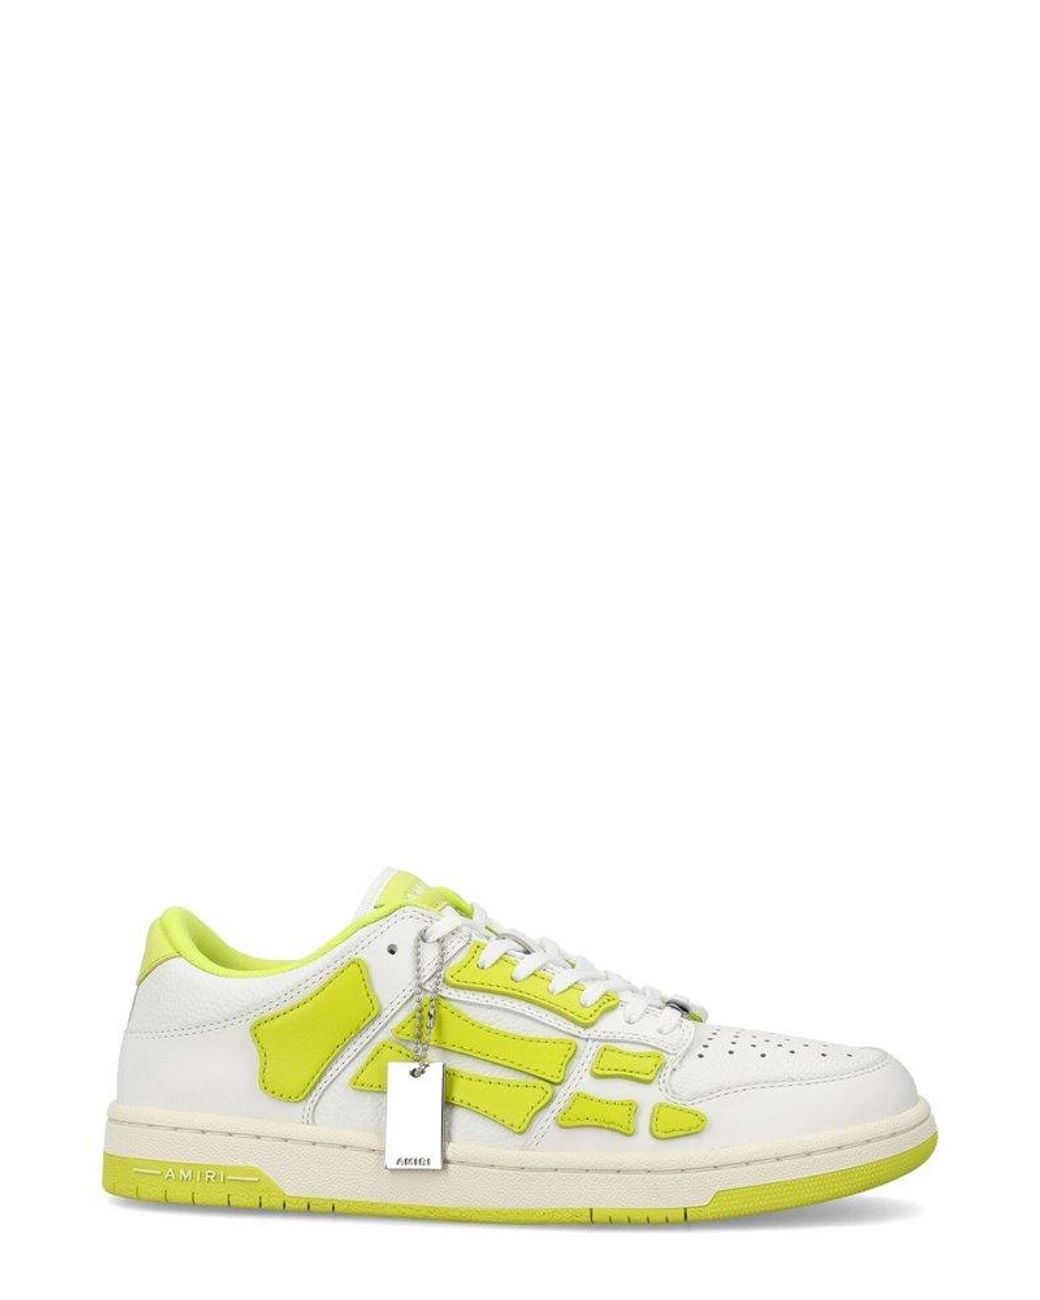 Amiri Leather Skel Top Panelled Lace-up Sneakers in Yellow for Men | Lyst